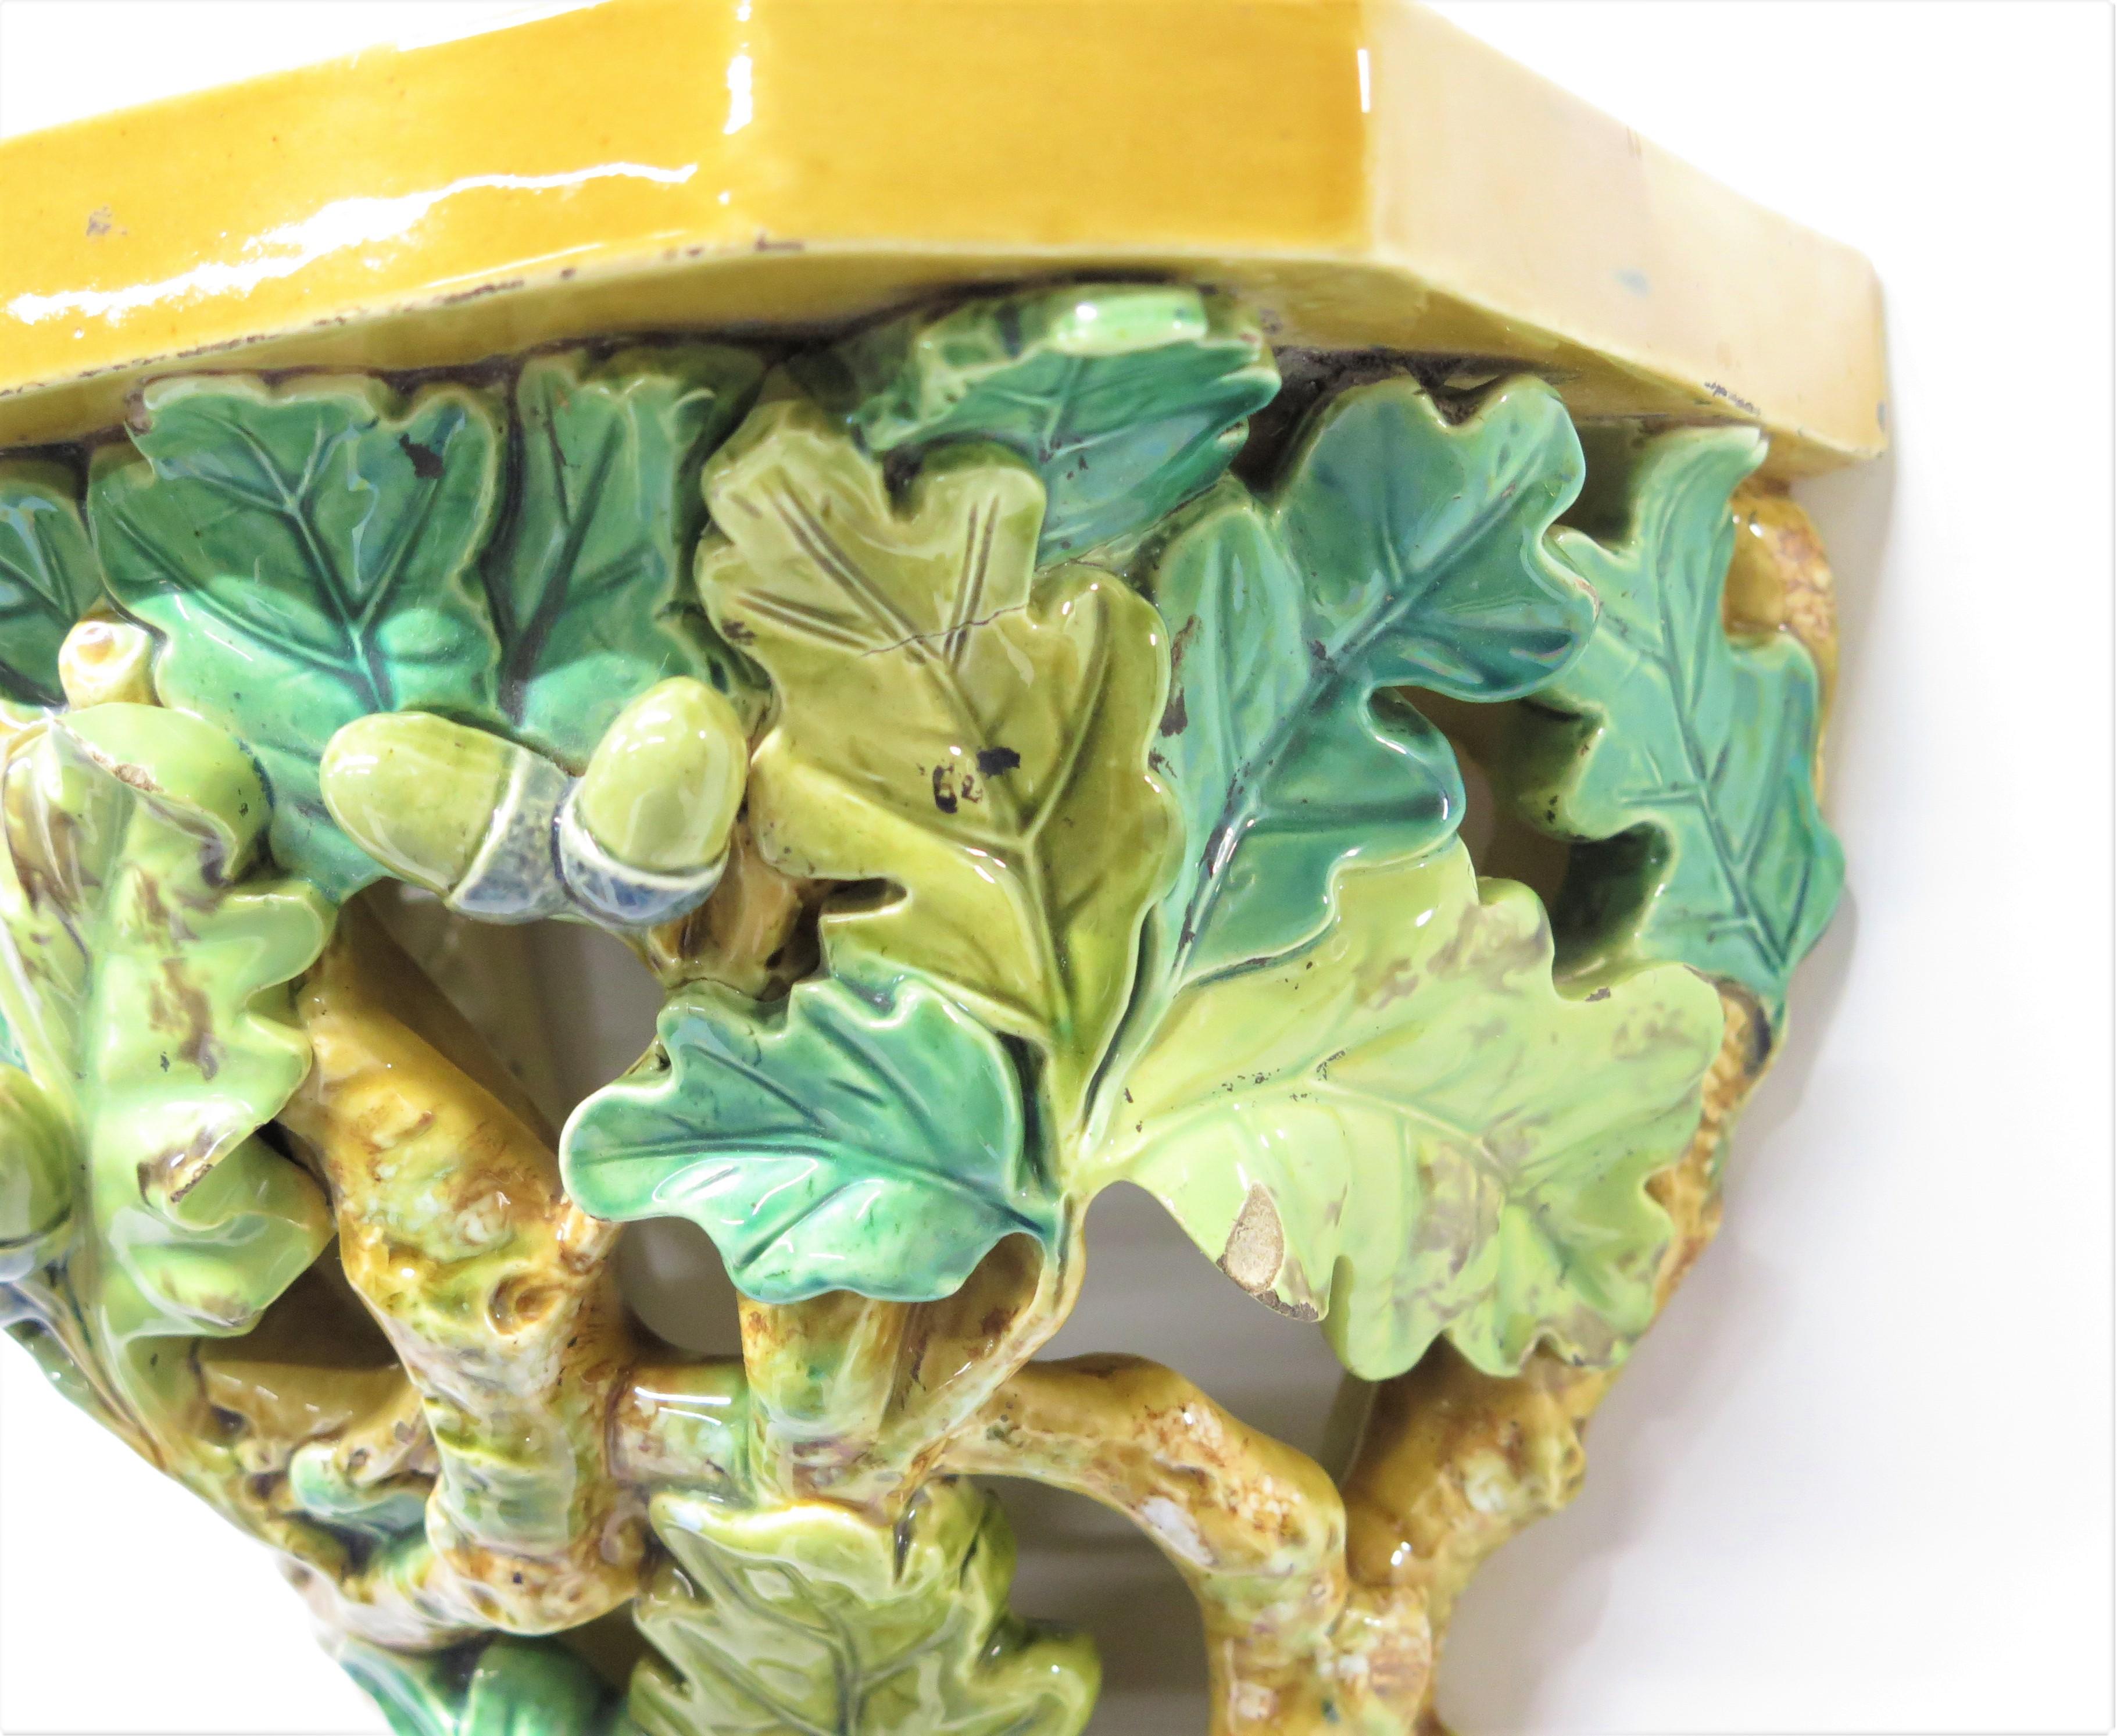 a heavy Brownfield majolica wall bracket in a reticulated oak leaves and acorn design, circa 1885 - 1892

MEASUREMENTS;

9.5